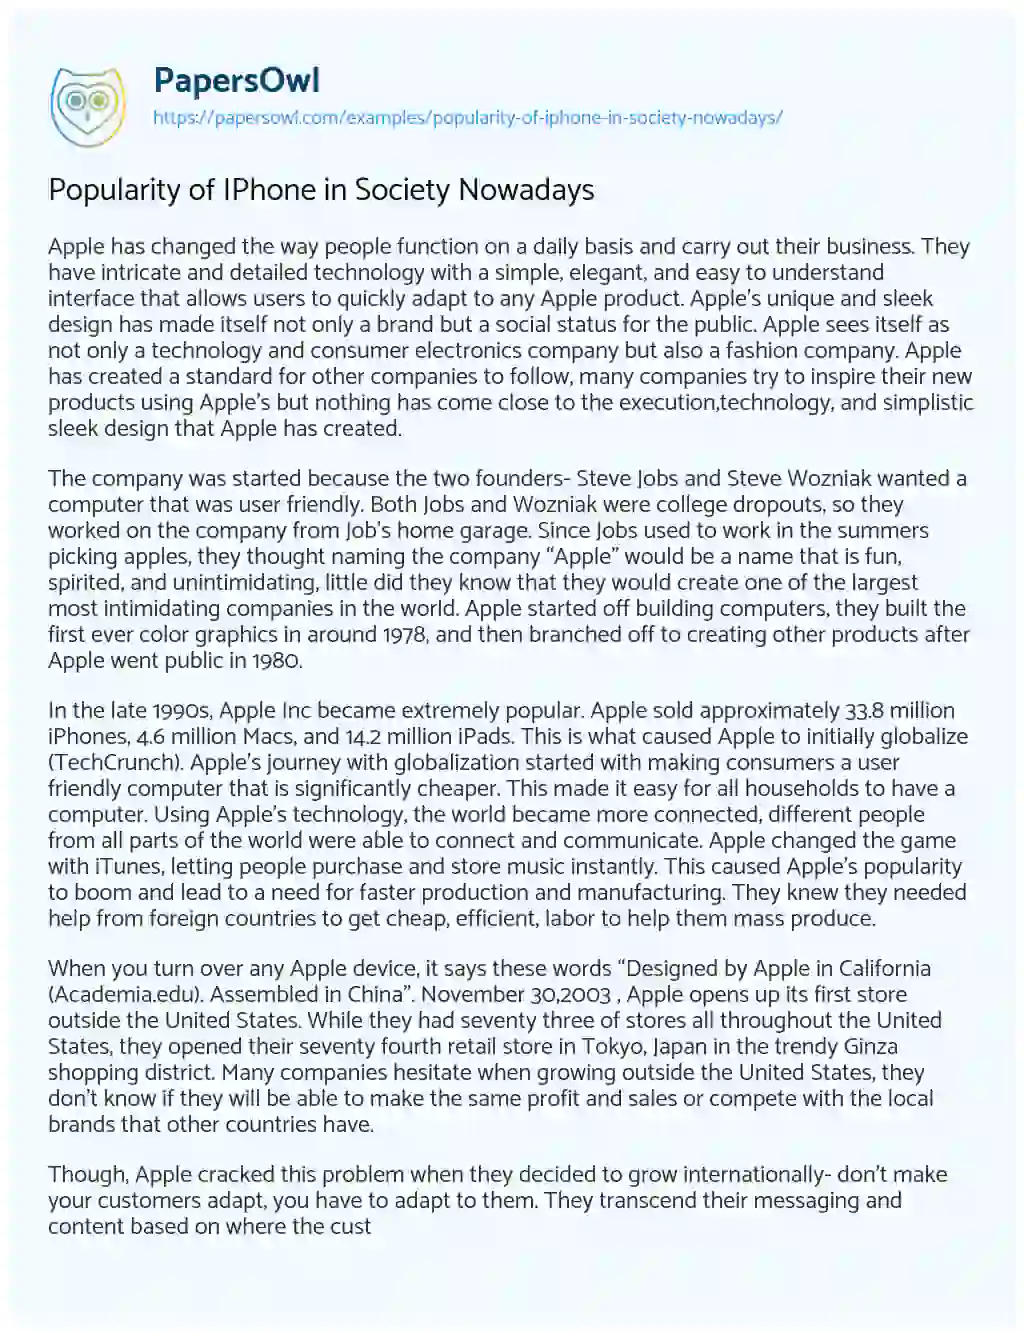 Essay on Popularity of IPhone in Society Nowadays